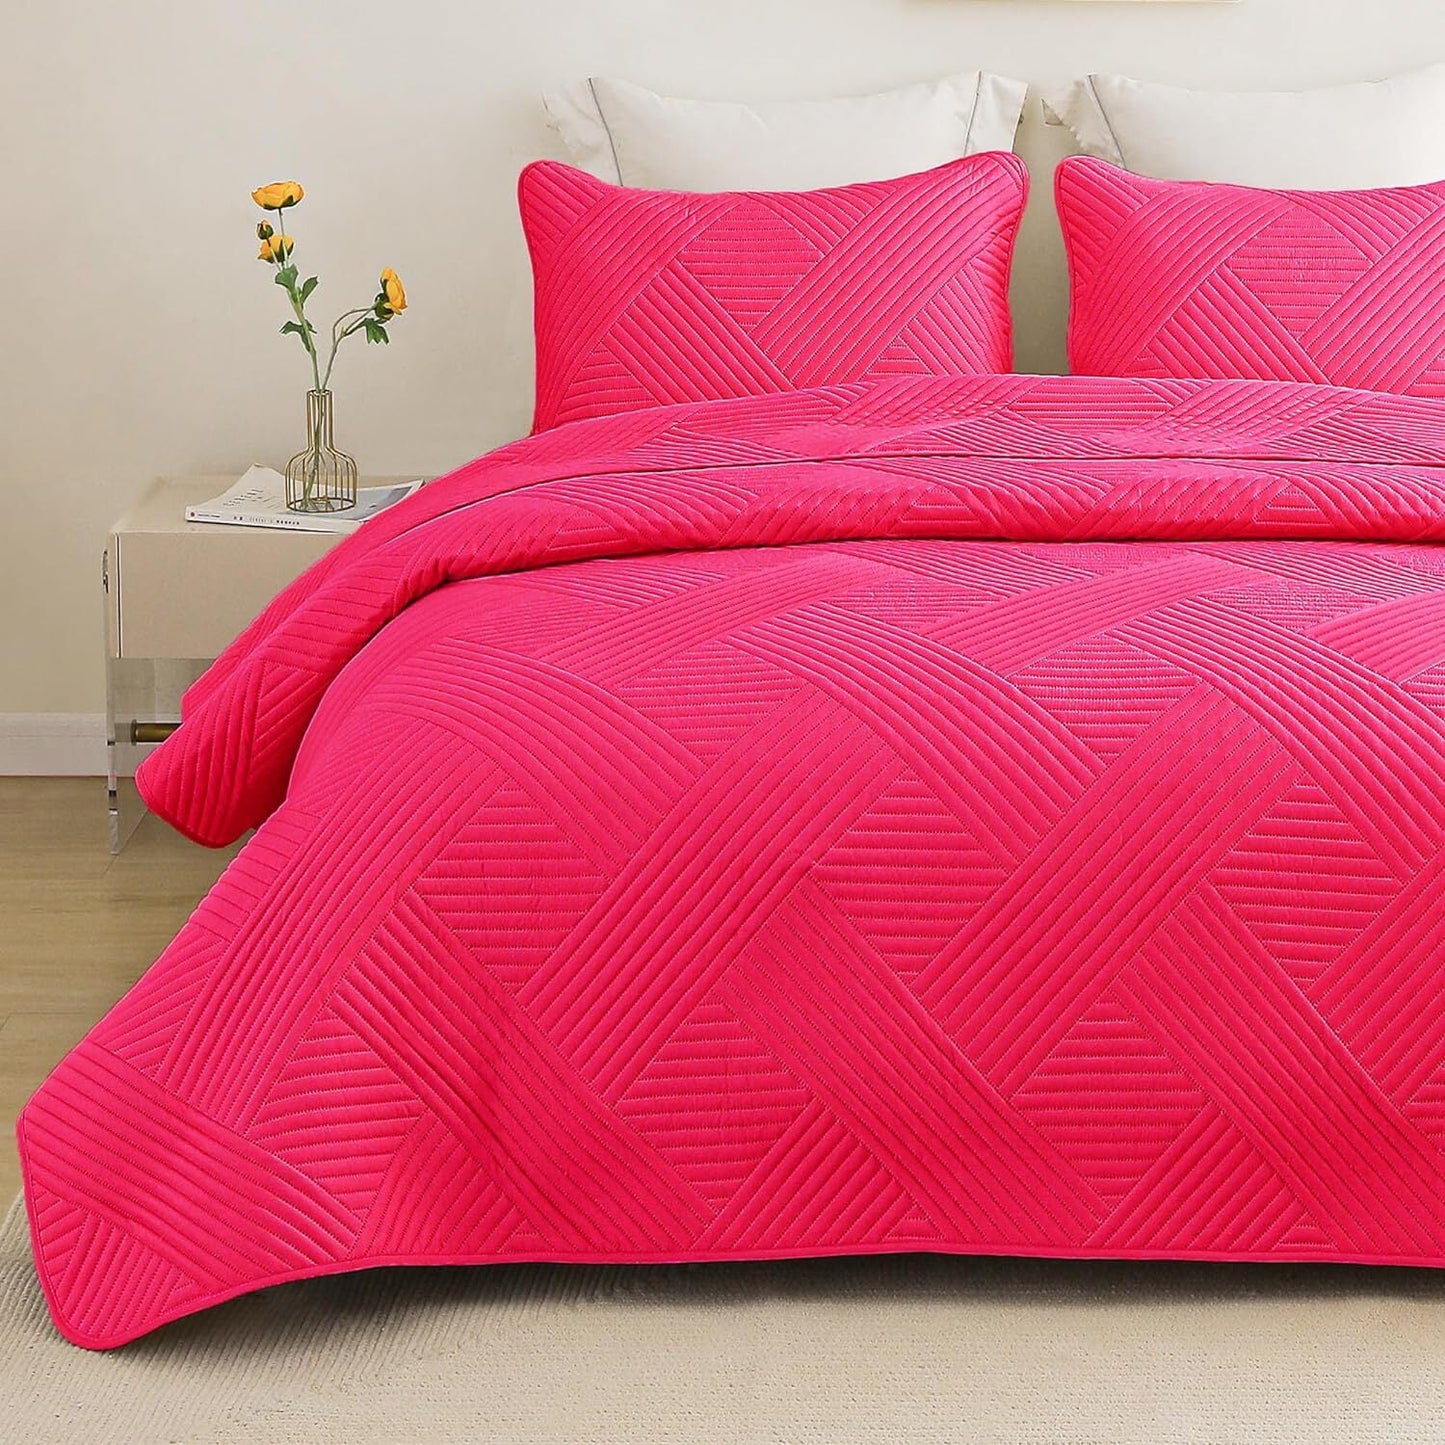 Whale Flotilla Quilt Set Twin Size, Soft Microfiber Lightweight Bedspread Coverlet Bed Cover (Striped Pattern) for All Seasons, Hot Pink, 2 Pieces (Includes 1 Quilt, 1 Sham)